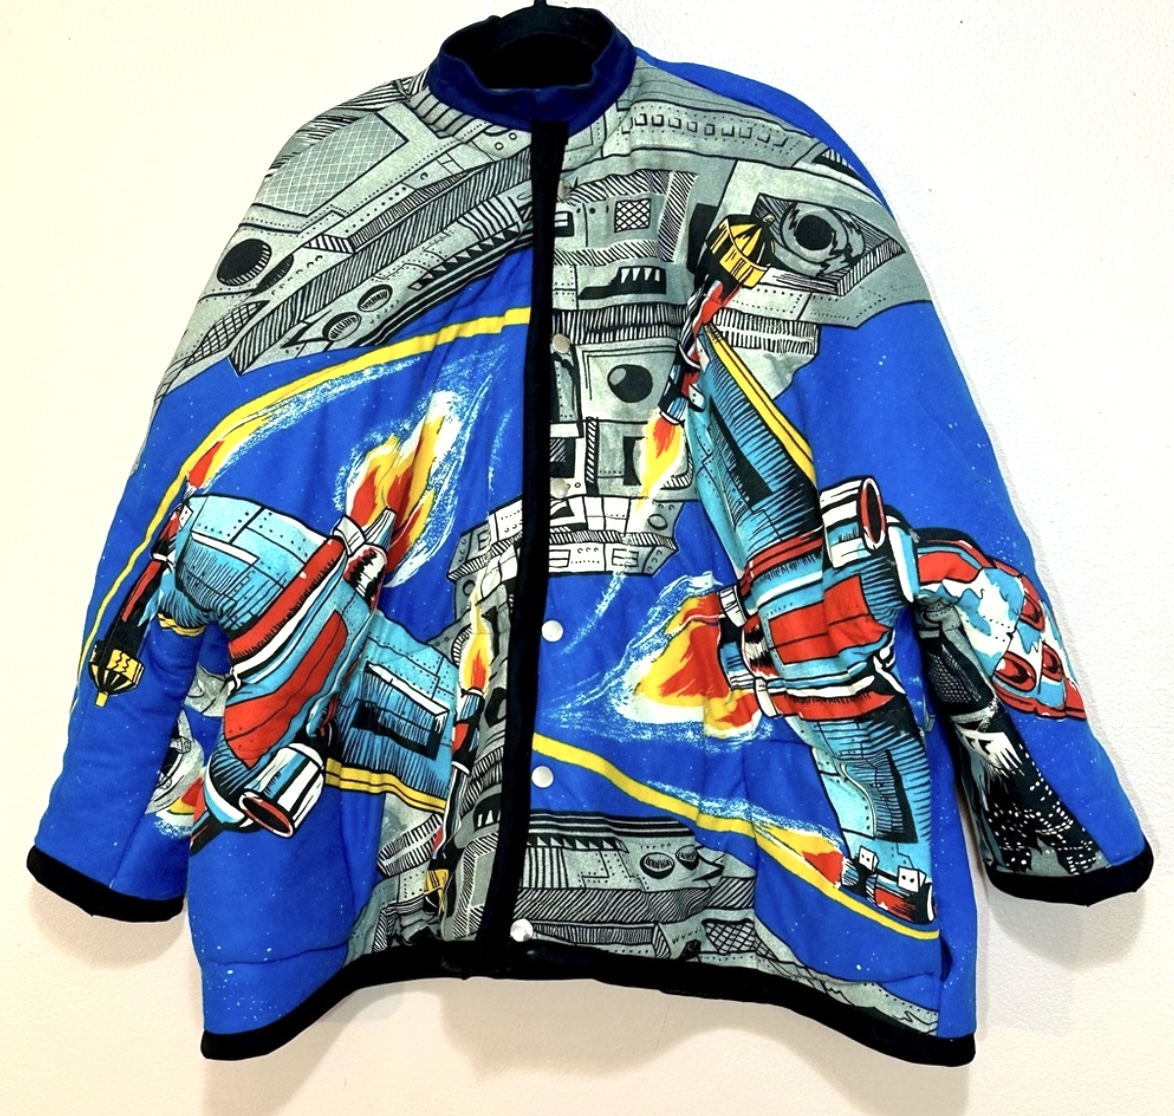 A blue jacket with a star wars design on it.